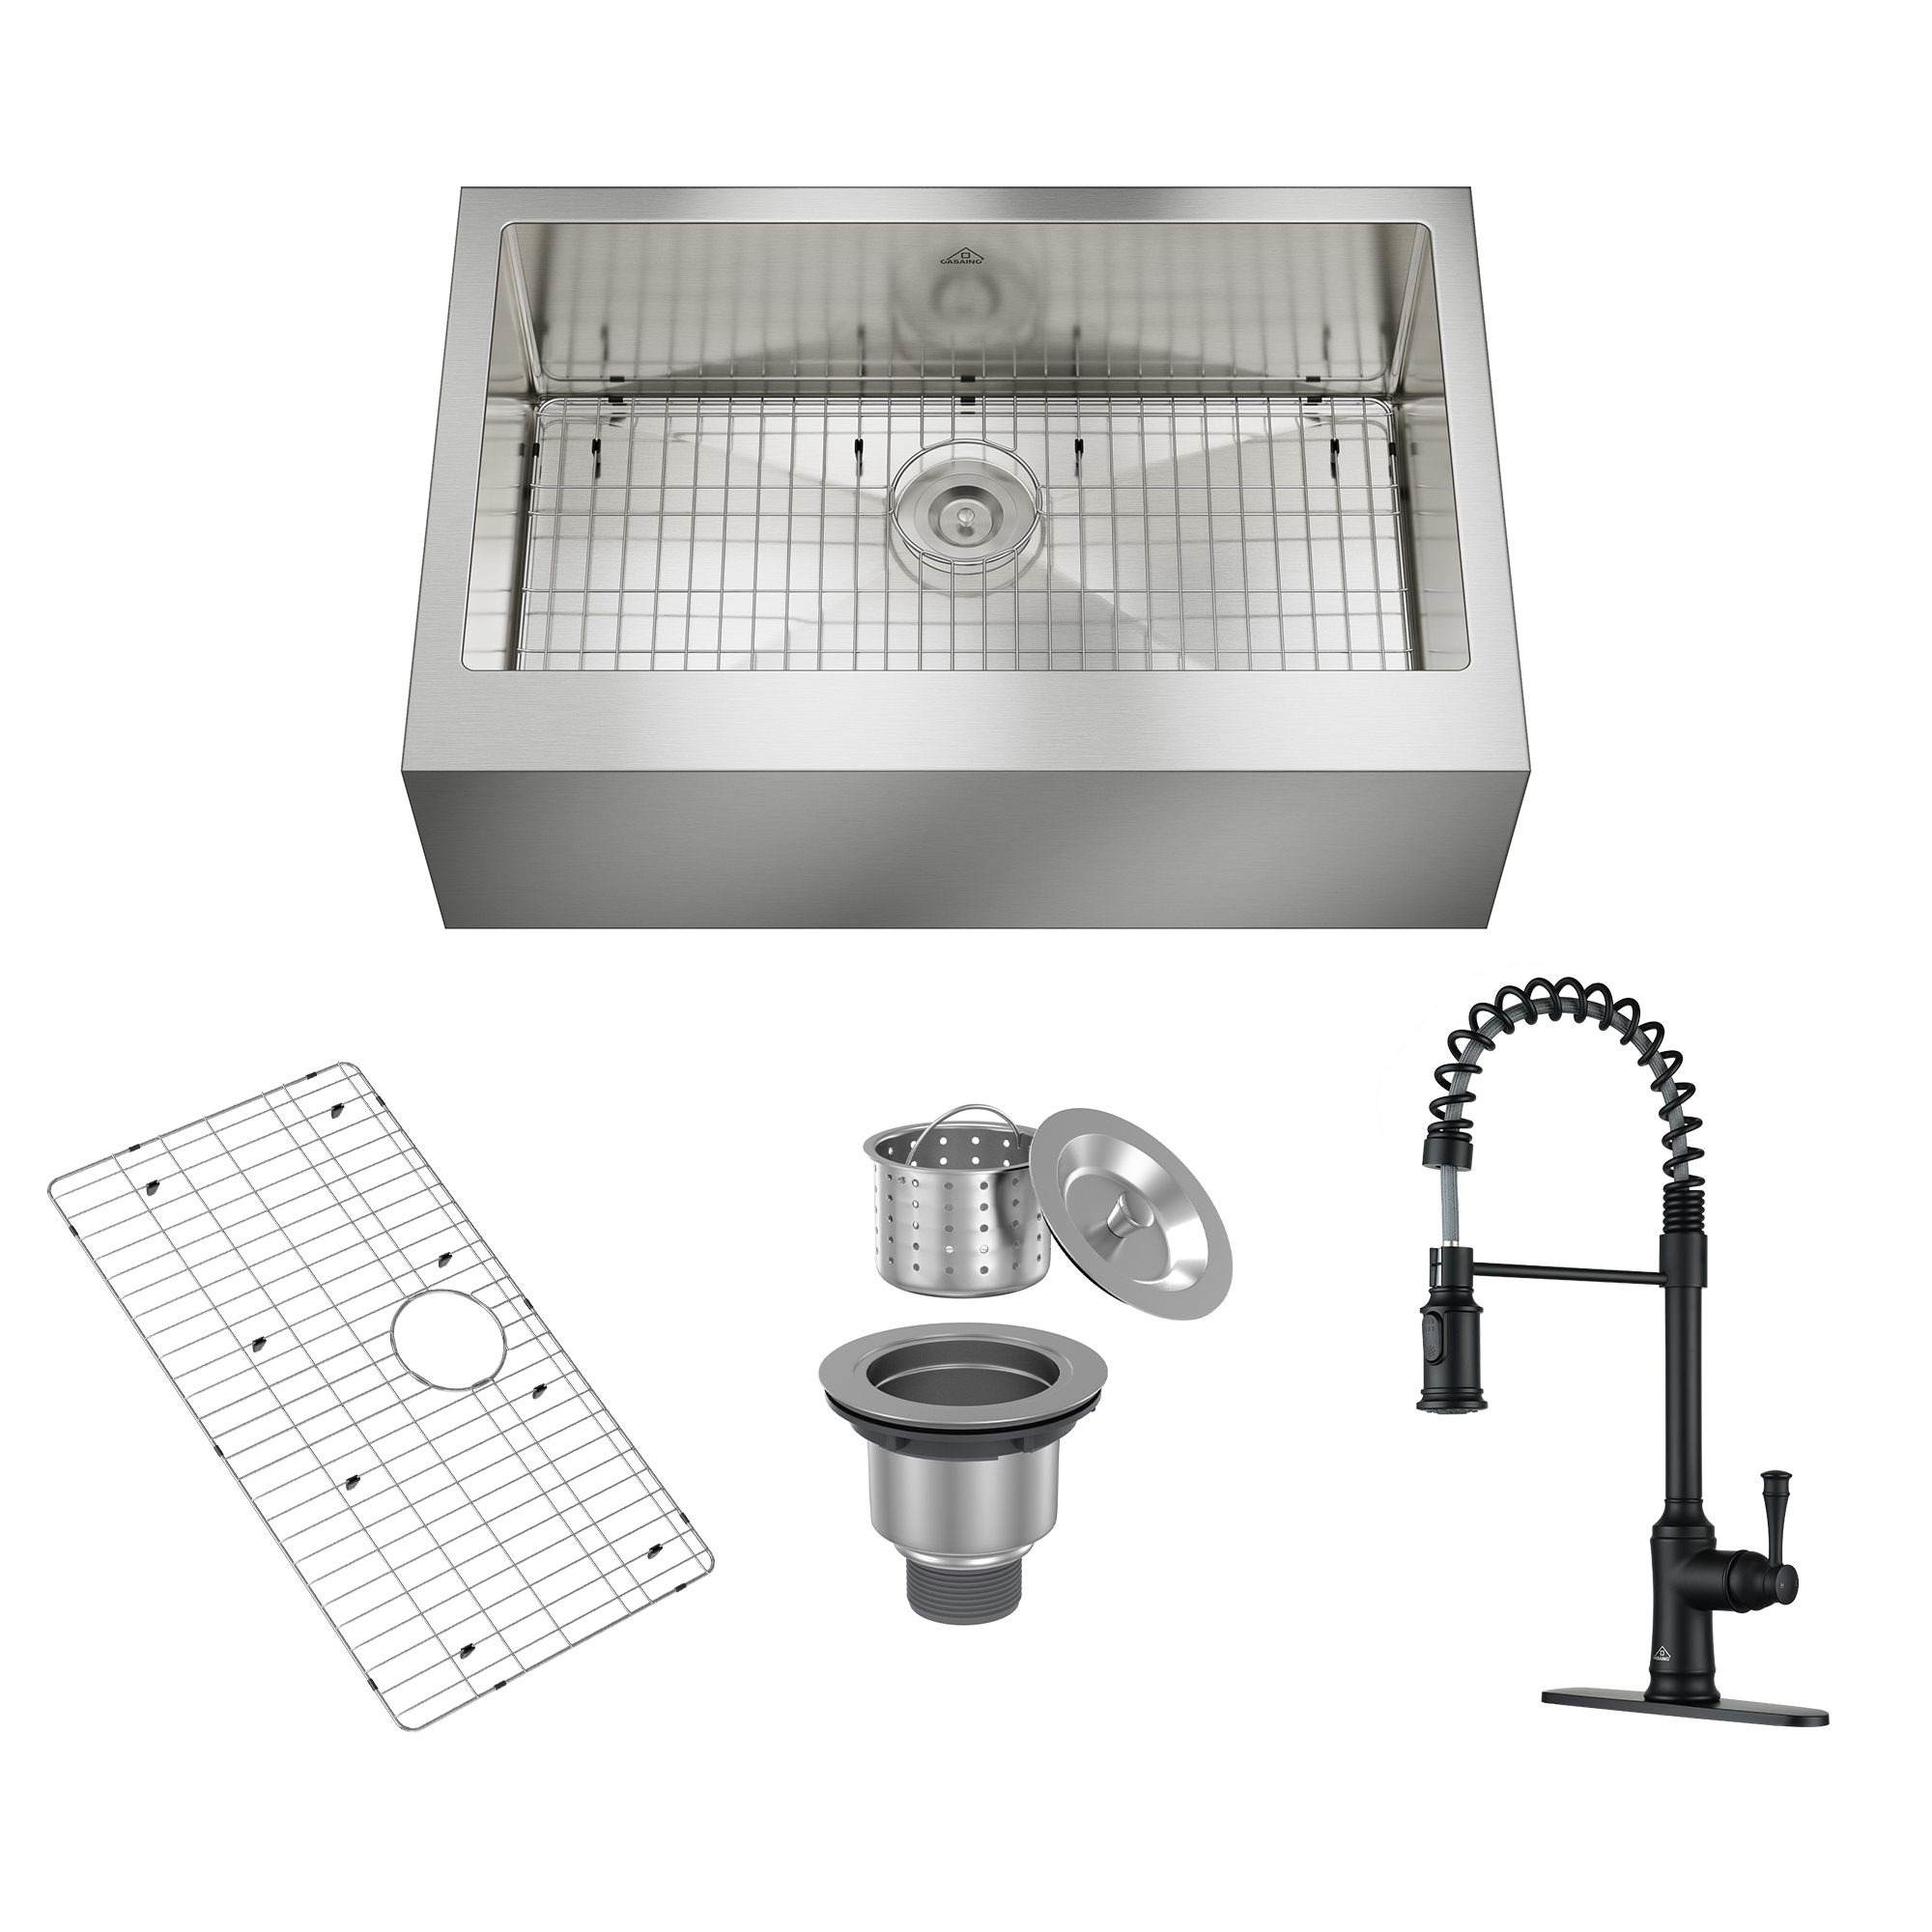 33" Premium All-in-One Deep Basin 304 Stainless Steel Kitchen Sink & Single-Handle Spring Pull-Out Kitchen Faucet